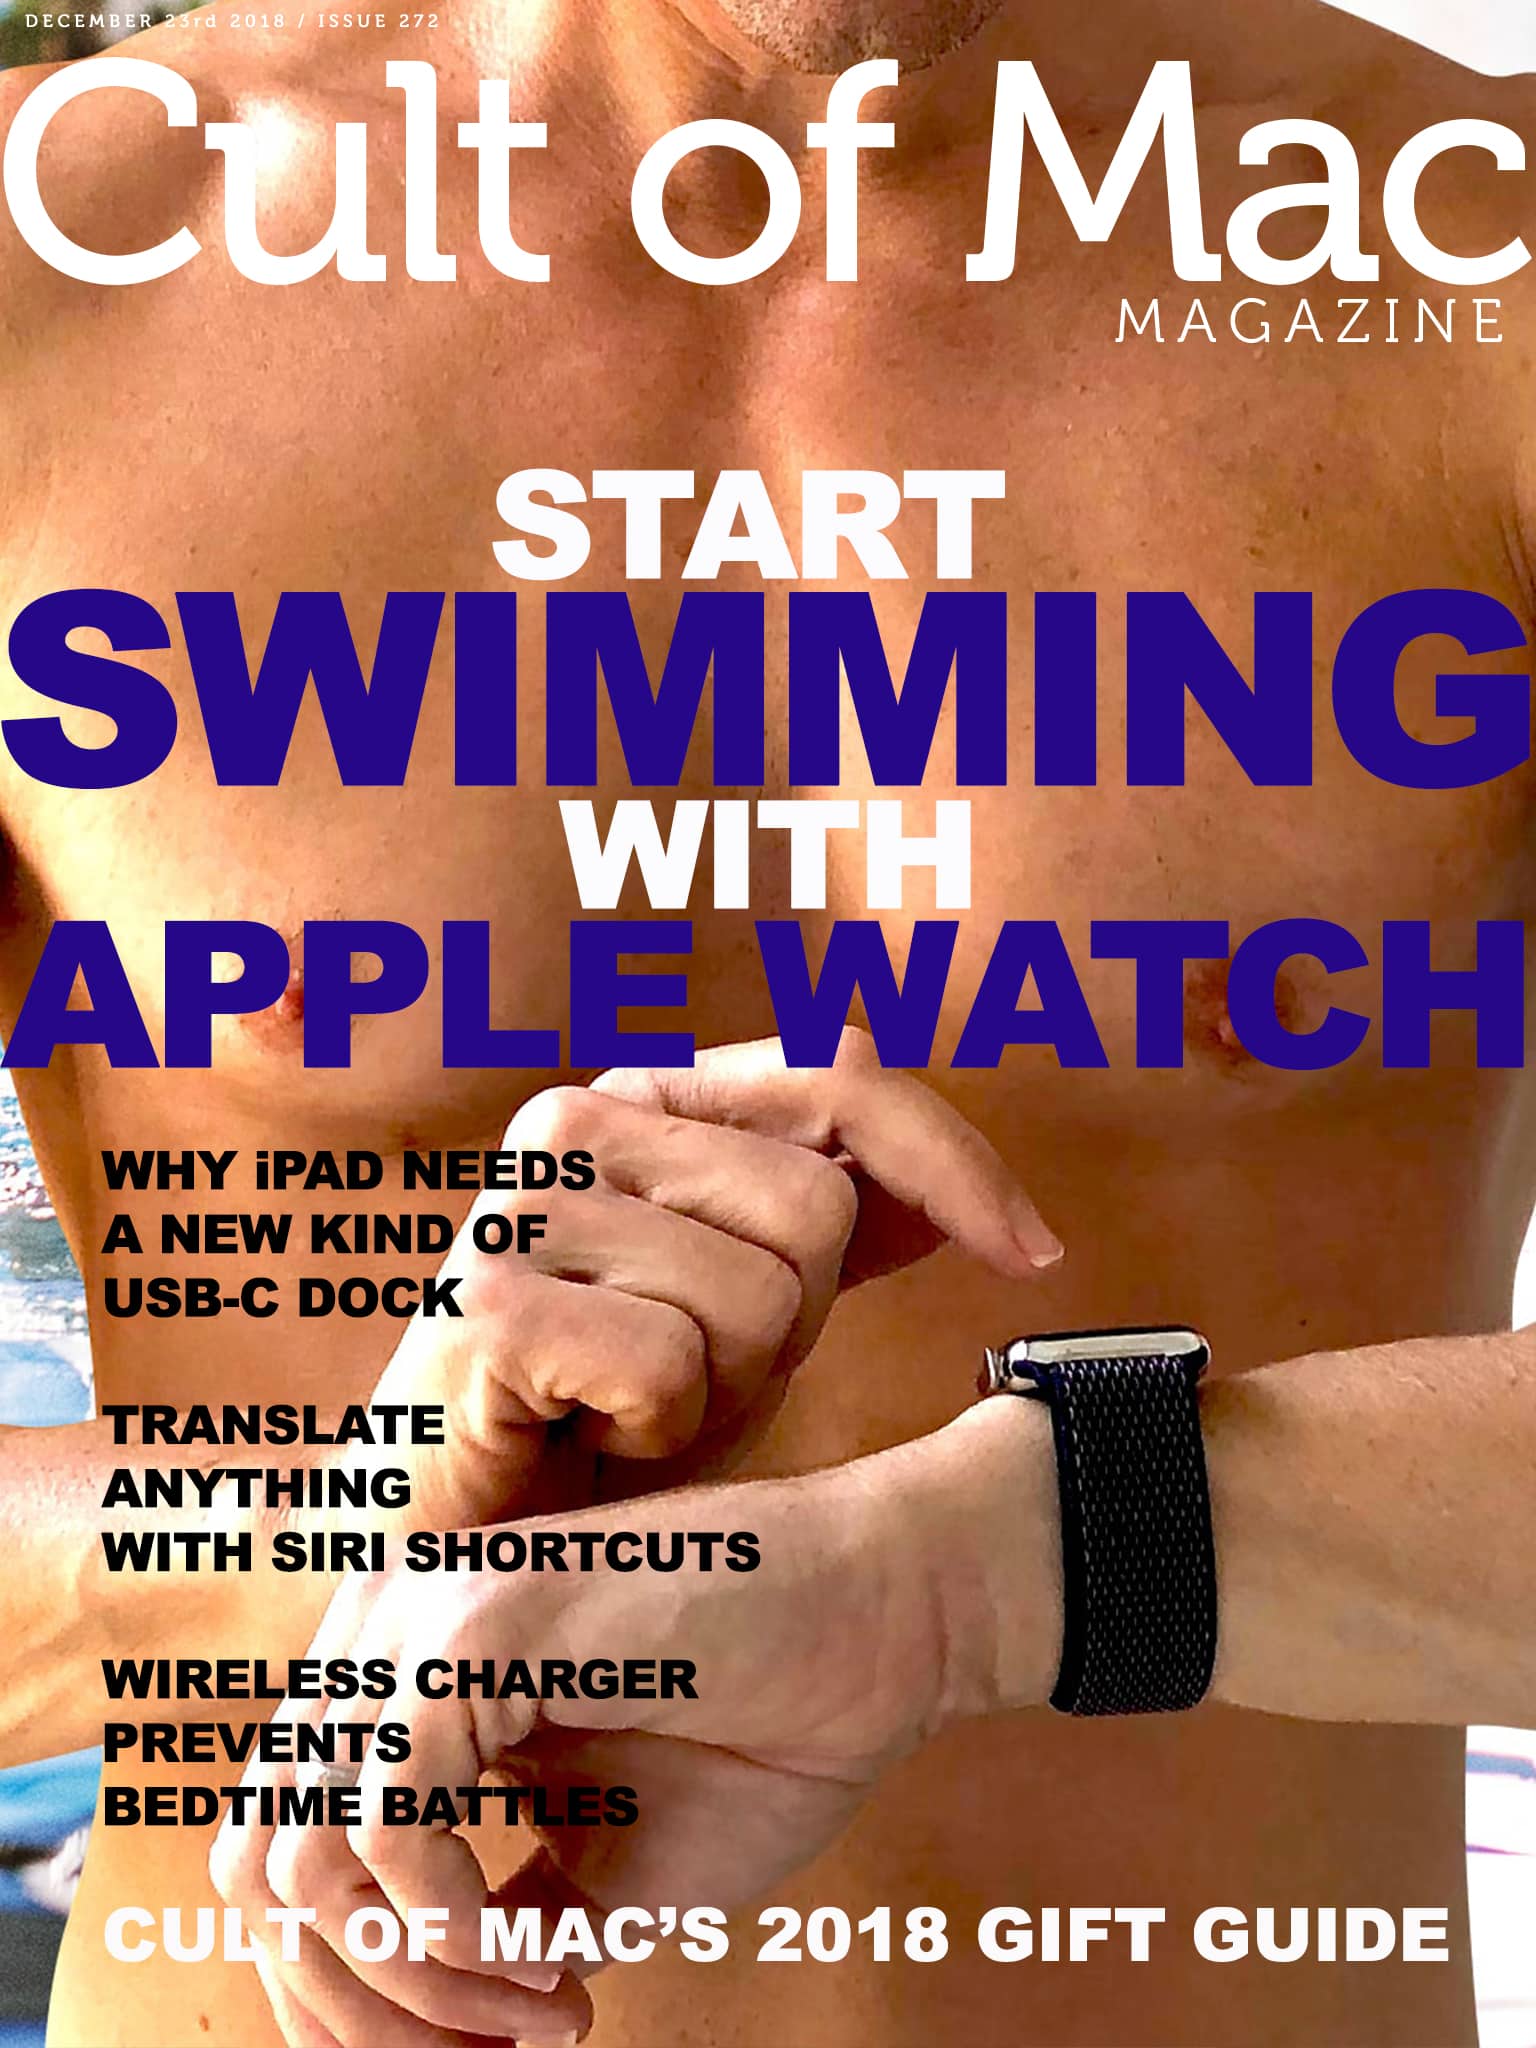 What are you waiting for? Time to jump in and start swimming with Apple Watch!